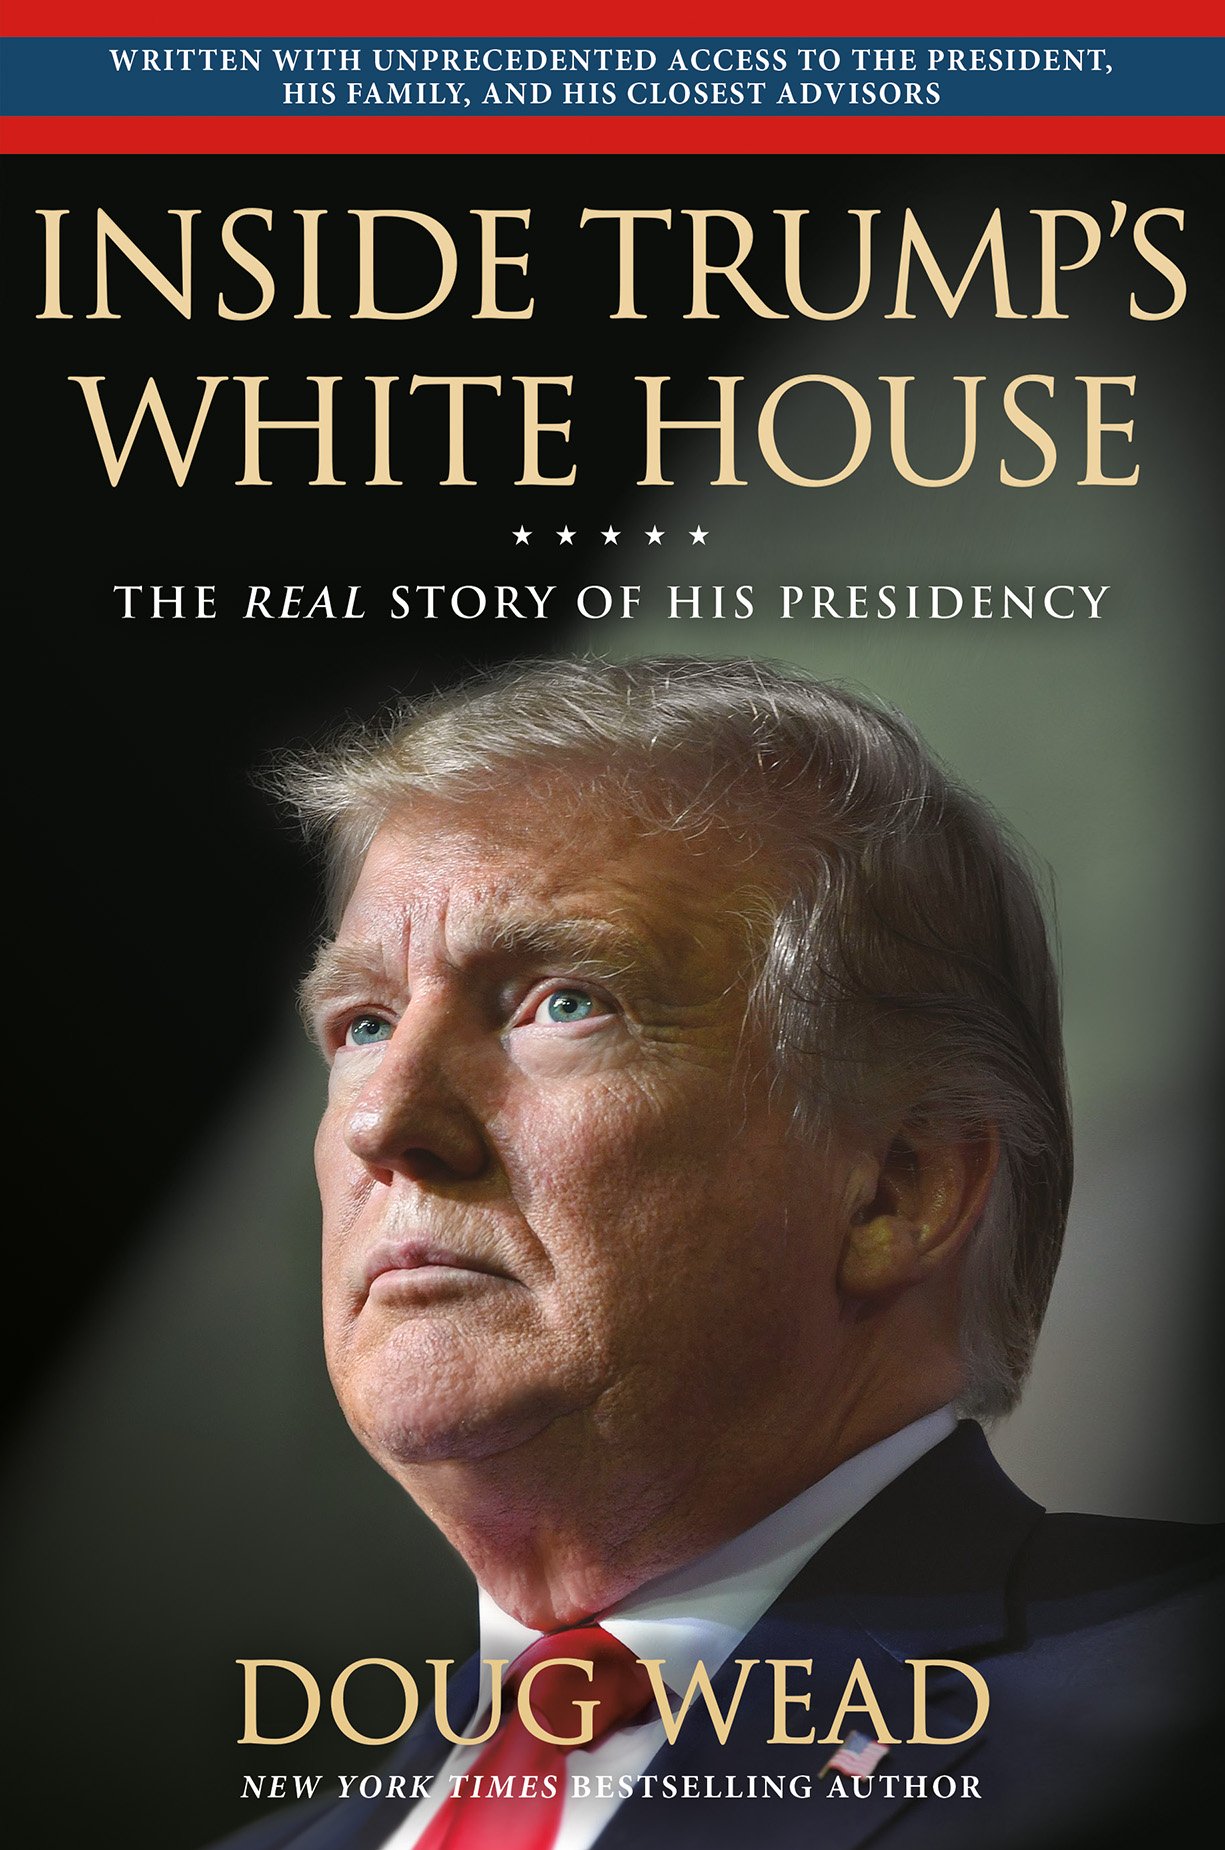 Historian Doug Wead’s book launched later in November and includes exclusive interviews with Trump, his family and senior staffers. (Photo courtesy of Hachette Book Group)